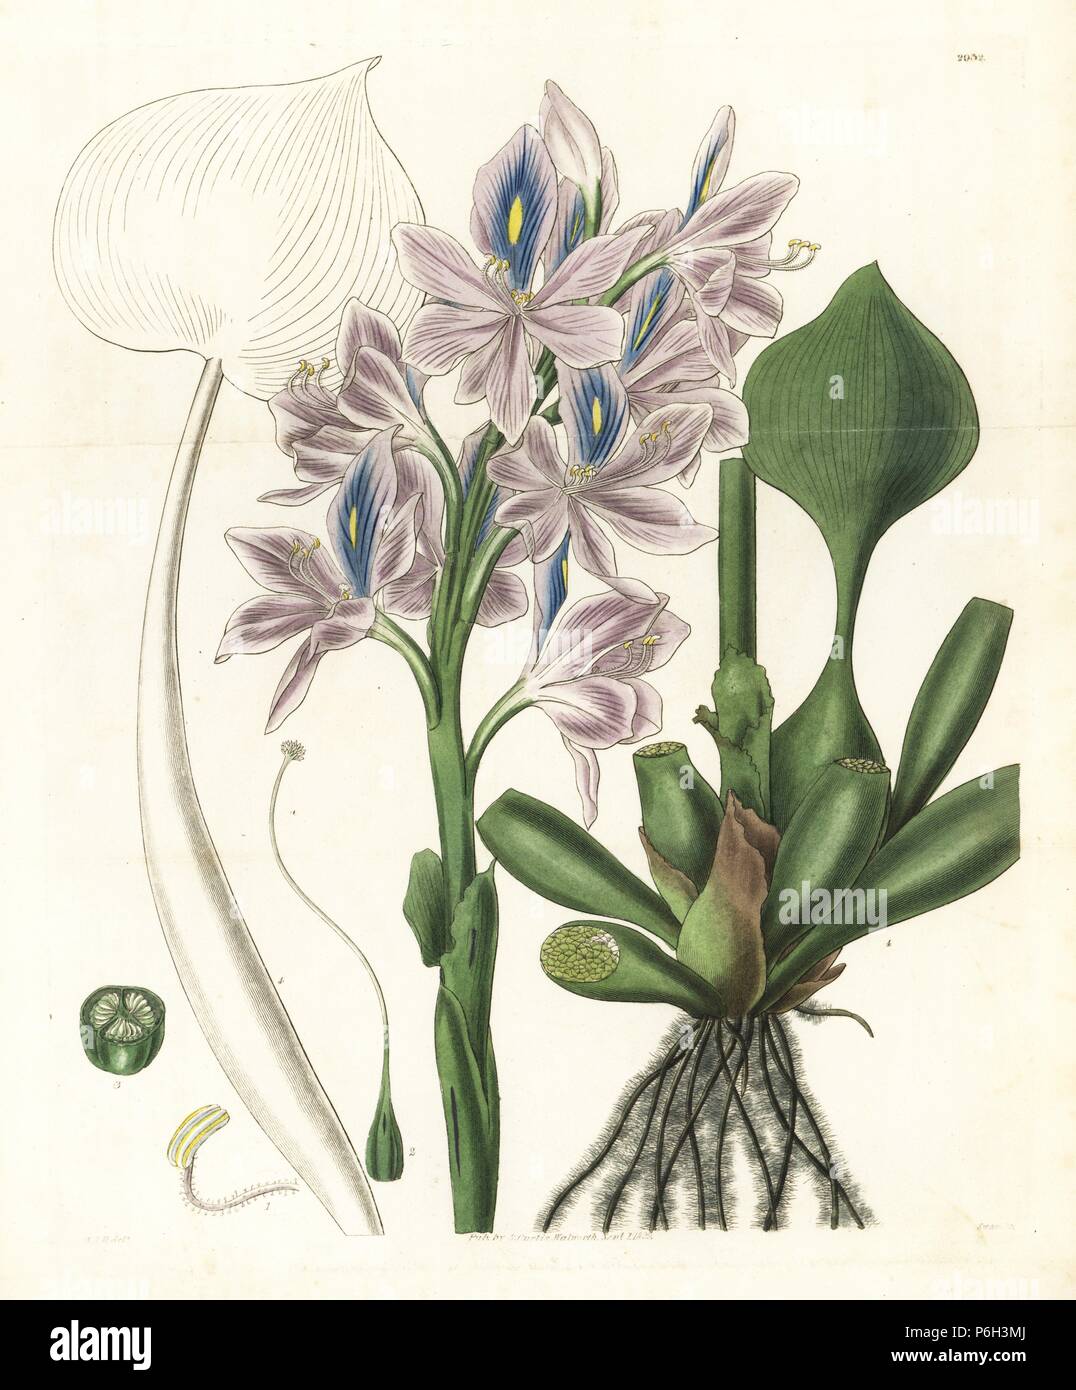 Anchored water hyacinth, Eichhornia azurea (Large-flowered pontederia, Pontederia azurea). Handcoloured copperplate engraving by Swan after an illustration by William Jackson Hooker from Samuel Curtis's 'Botanical Magazine,' London, 1829. Stock Photo